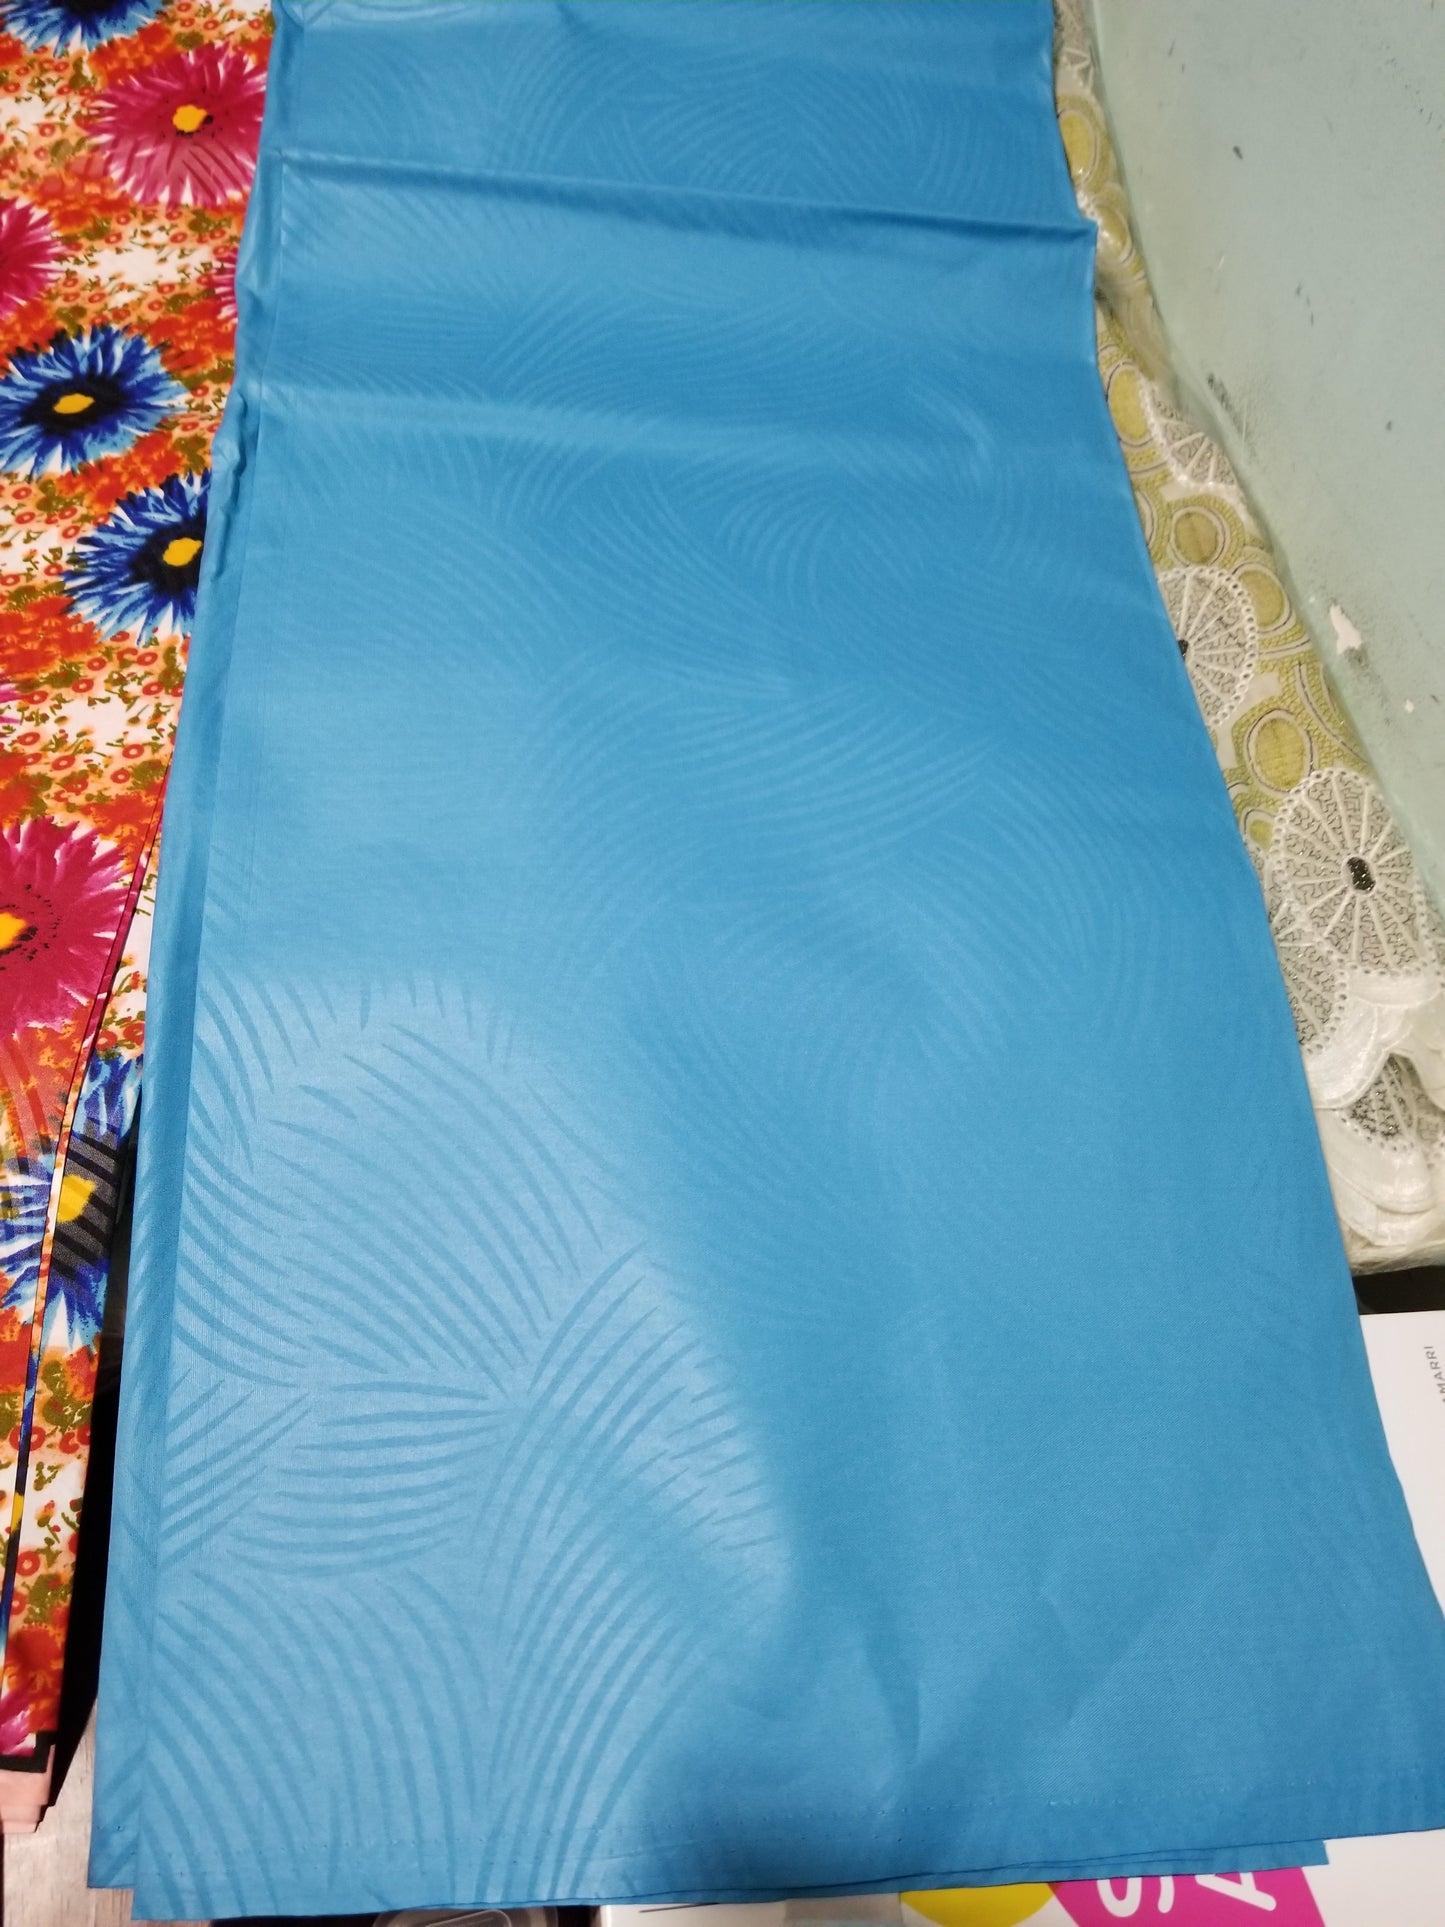 New arrival 4yds flower Ankara + 2yds plain combinations. Latest African  wax print fabric. Turquoise blue color mix poly cotton. AFRICAN wax print sold per 6yds. Price is for 6yds.